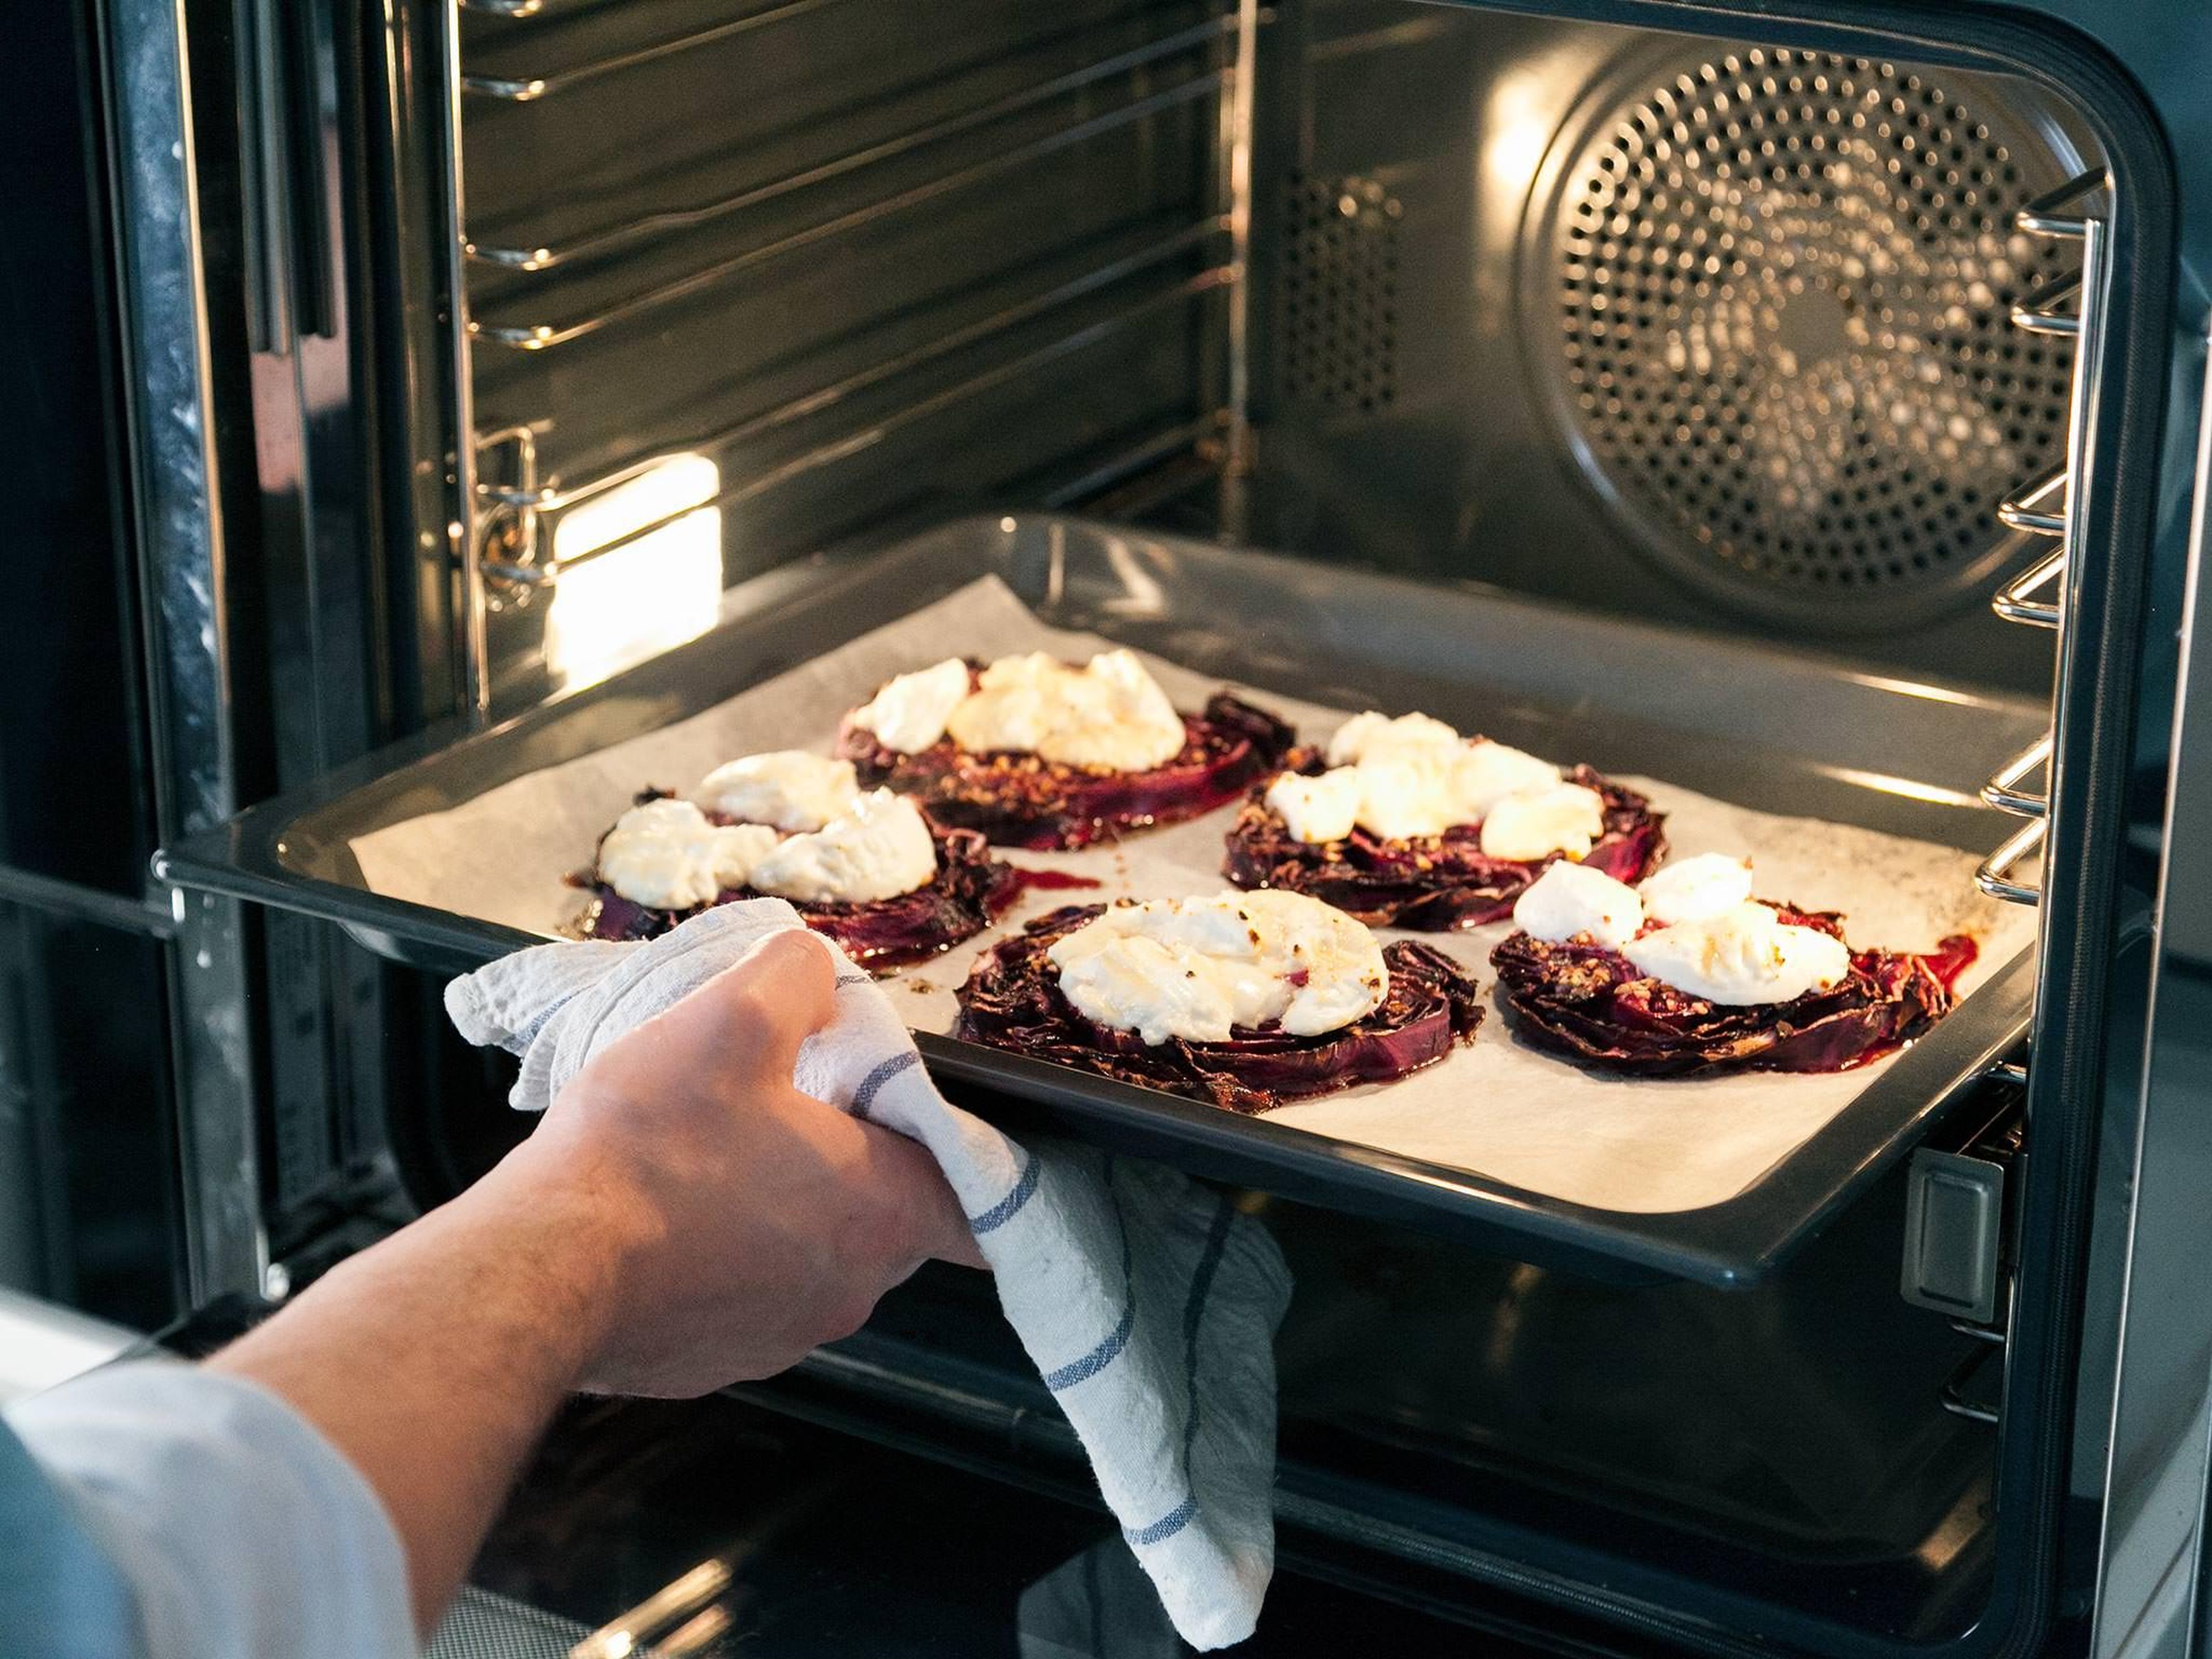 Bake at 160°C/320°F for approx. 40 min. Afterwards, remove from the oven and spread goat cheese onto red cabbage slices. Drizzle maple syrup on top and keep baking for approx. 5 min.. or until the goat cheese turn lightly brown.